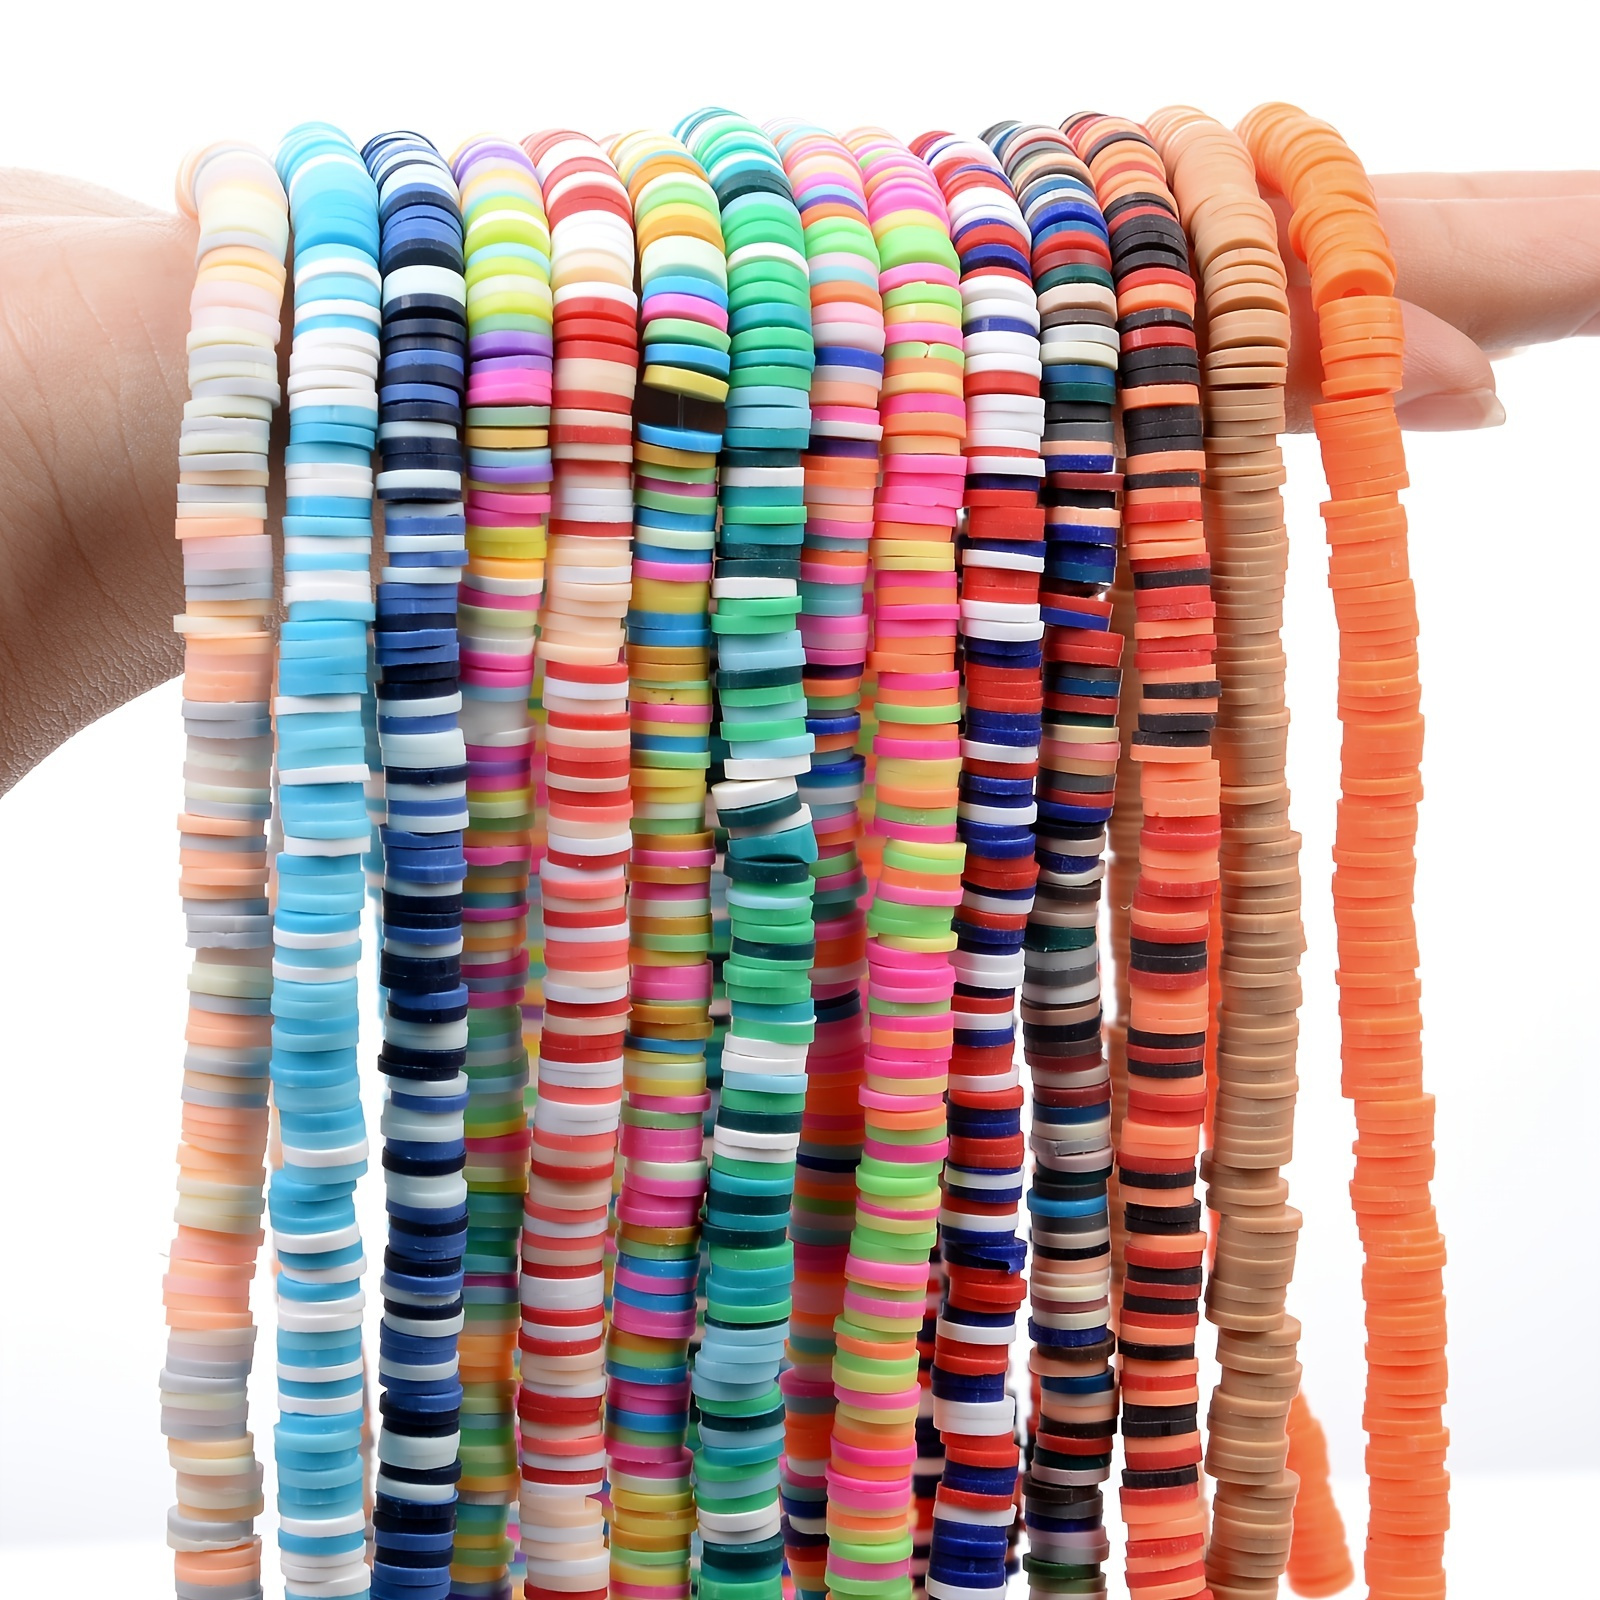 7200 Clay Beads Bracelet Making Kit,24 Colors Spacer Flat Beads for Jewelry  Maki